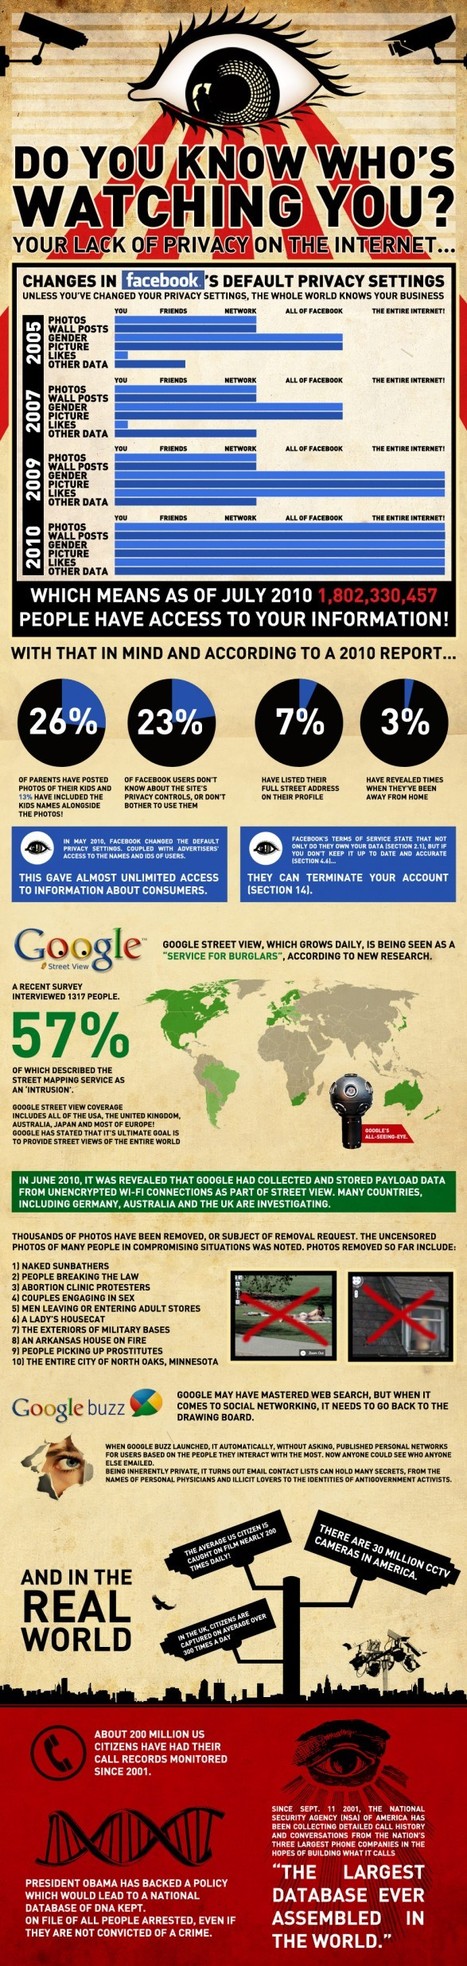 Do You Know Who’s Watching You? [INFOGRAPHIC] | 21st Century Learning and Teaching | Scoop.it